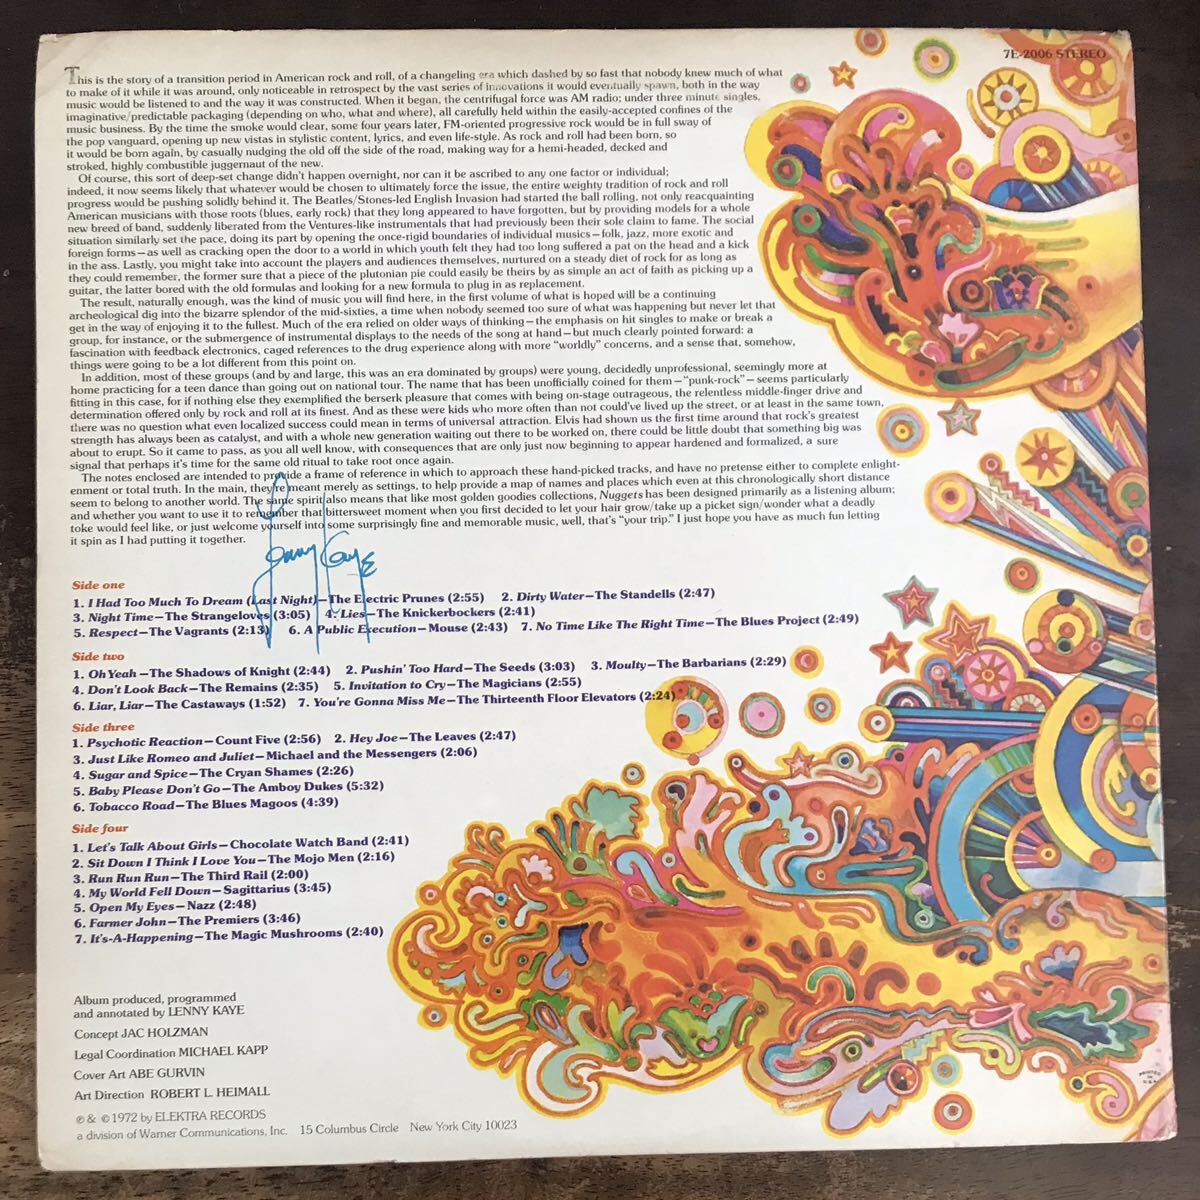 ■USオリジナル盤■Nuggets / Original Artifacts From The First Psychedelic Era 1965 - 1968 ■ナゲッツ■ 2LP / 1972 Electra Recordsの画像2